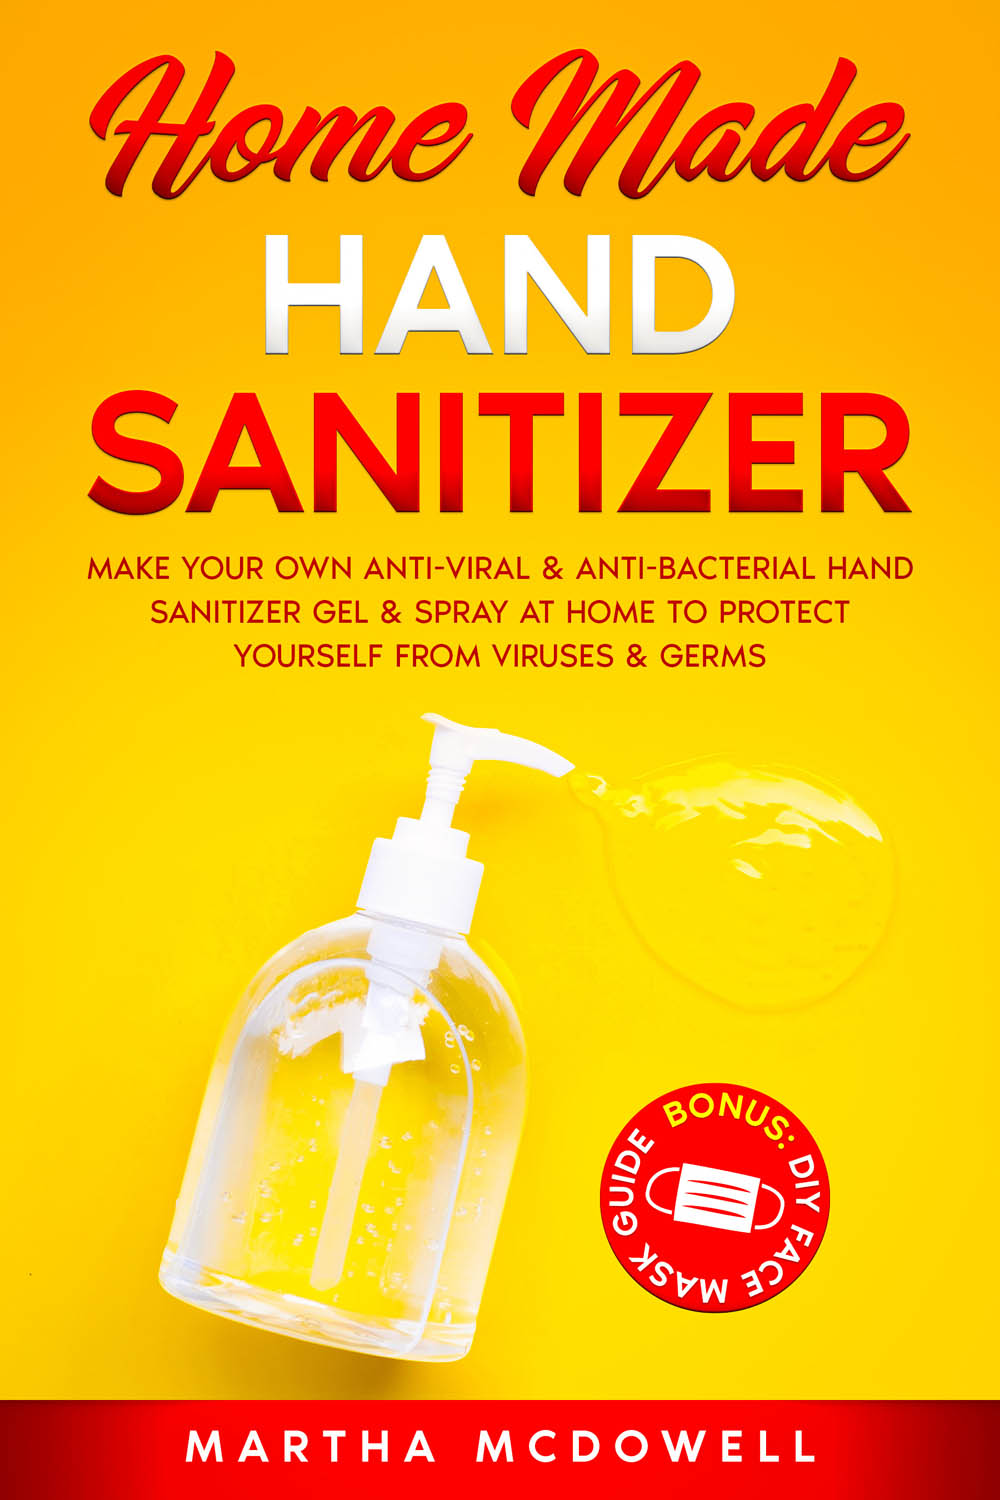 FREE: Home Made Hand Sanitizer: Make Your Own Anti-Viral & Anti-Bacterial Hand Sanitizer Gel & Spray at Home to Protect Yourself from Viruses & Germs by Martha McDowell